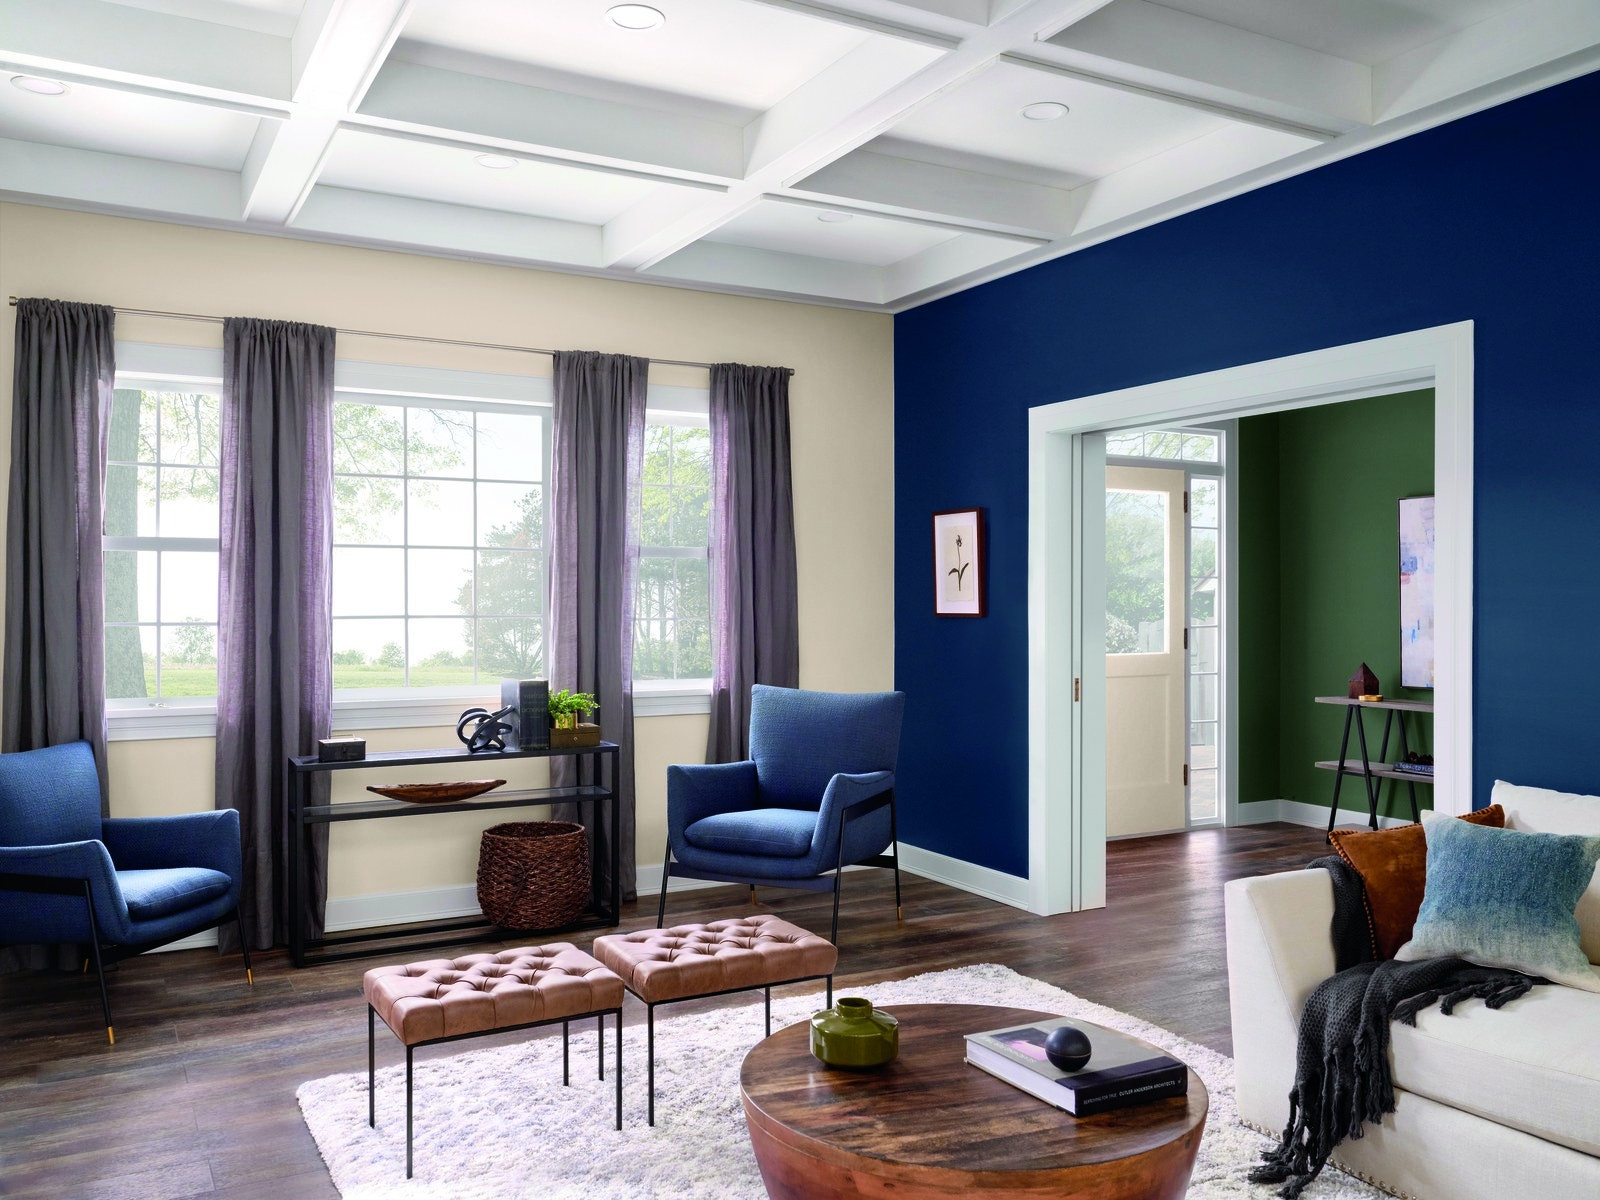 Bedroom Color Trends 2020
 The Color Trends We’ll Be Seeing in 2020 According to